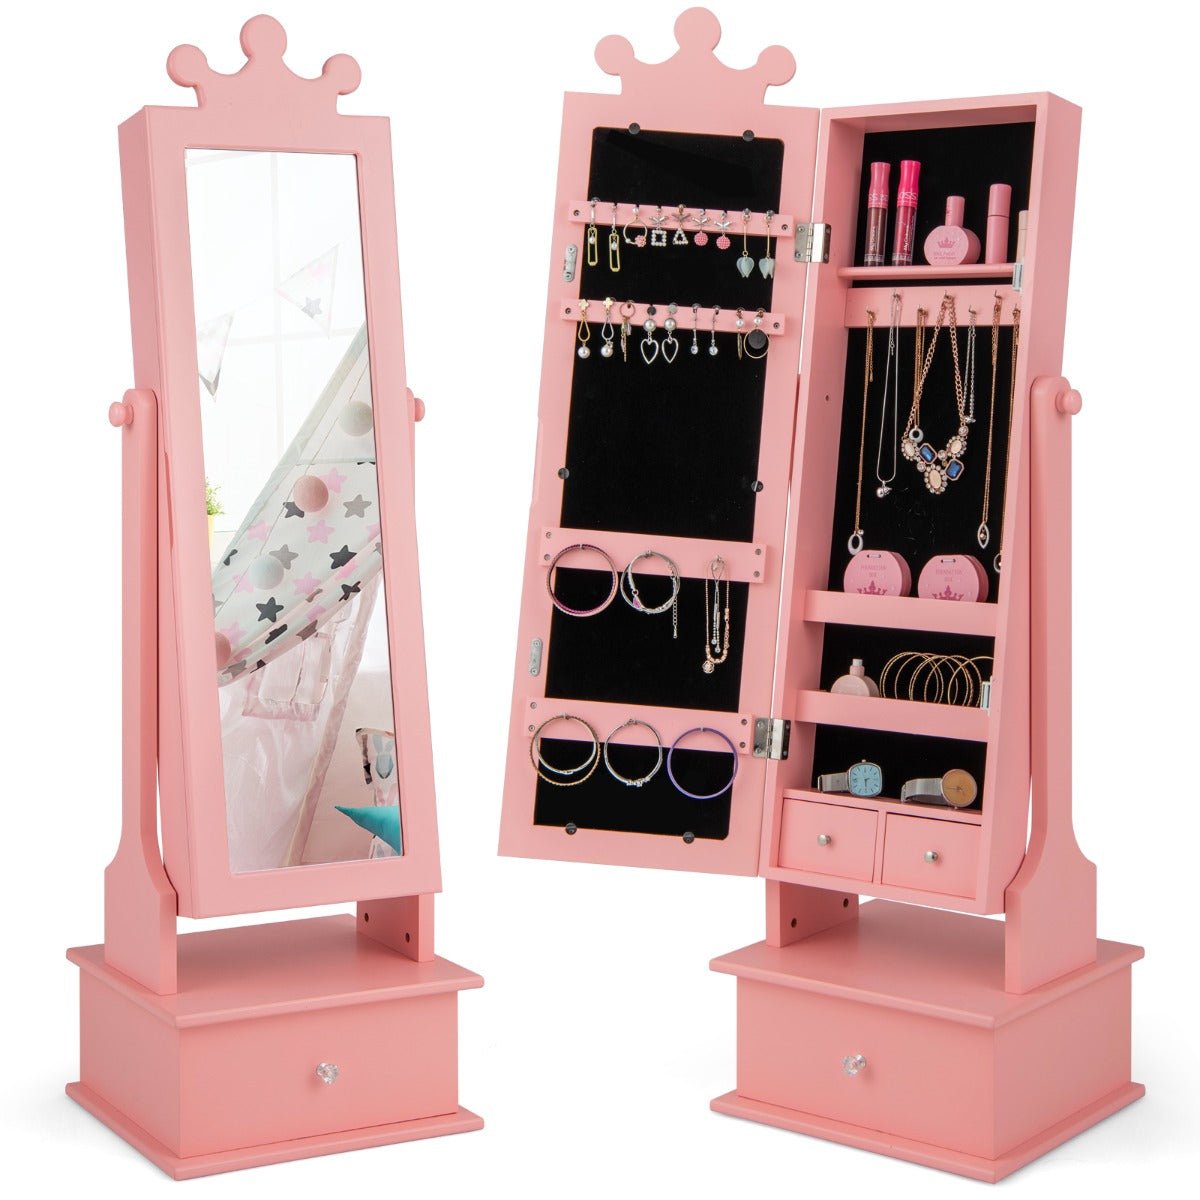 Pink Jewelry Armoire - Sparkle in Style!